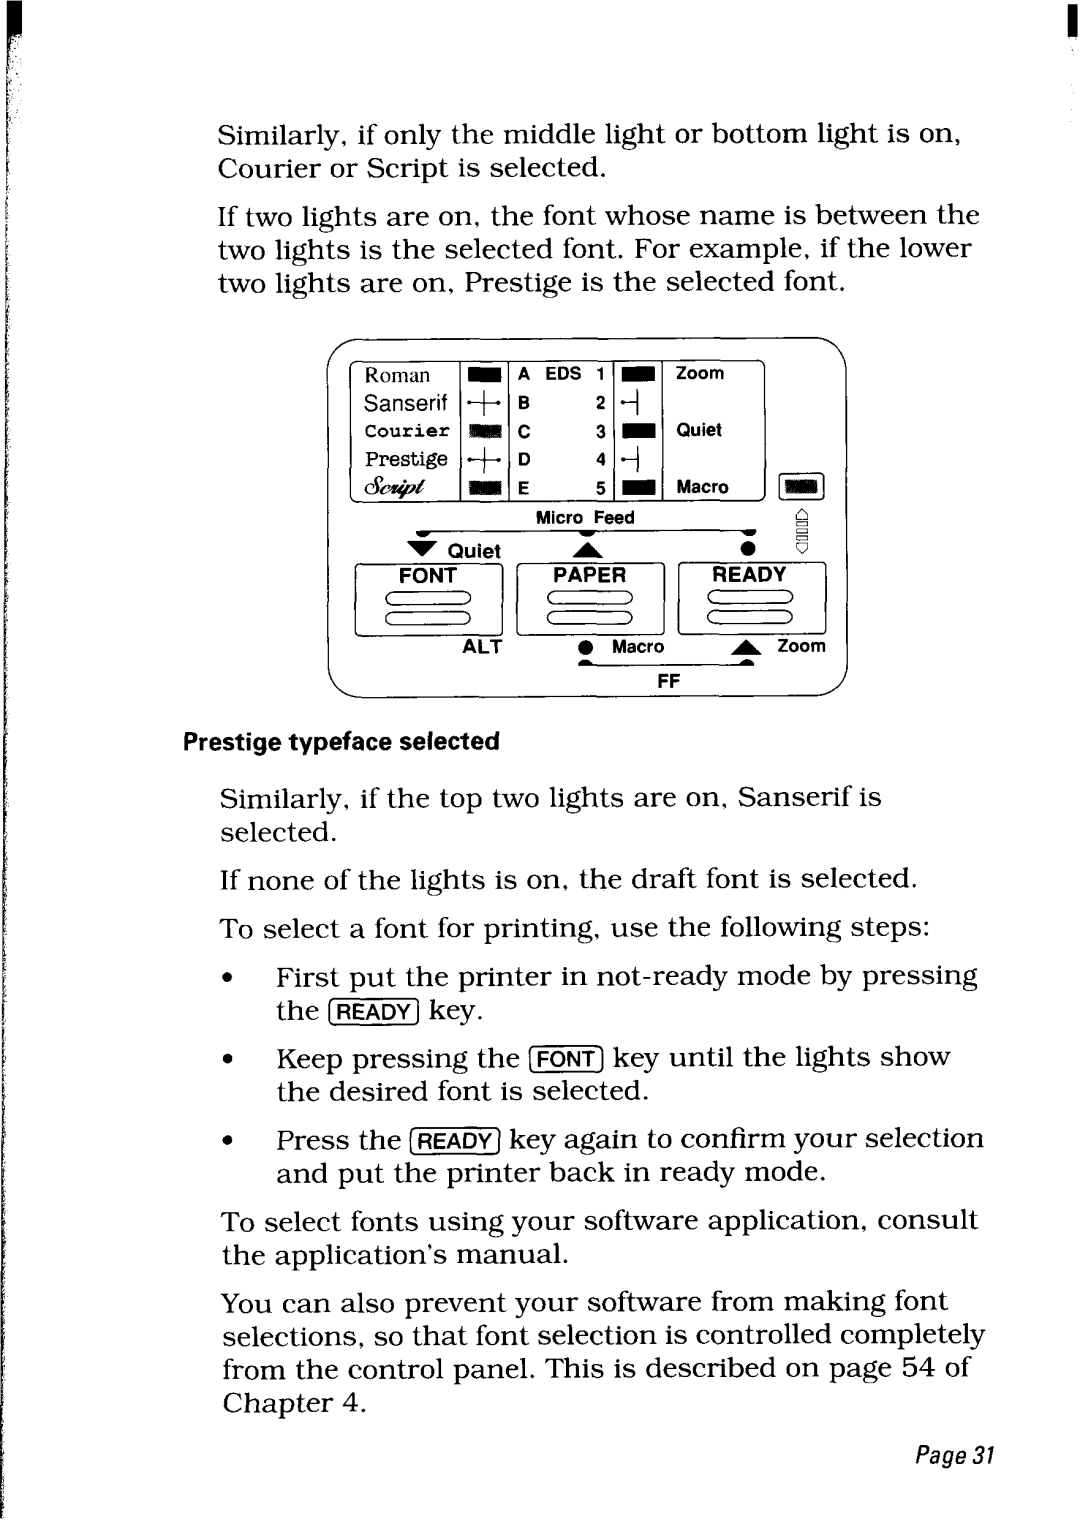 Star Micronics LC24-30 user manual Similarly, if the top two lights are on, Sanserif is selected 